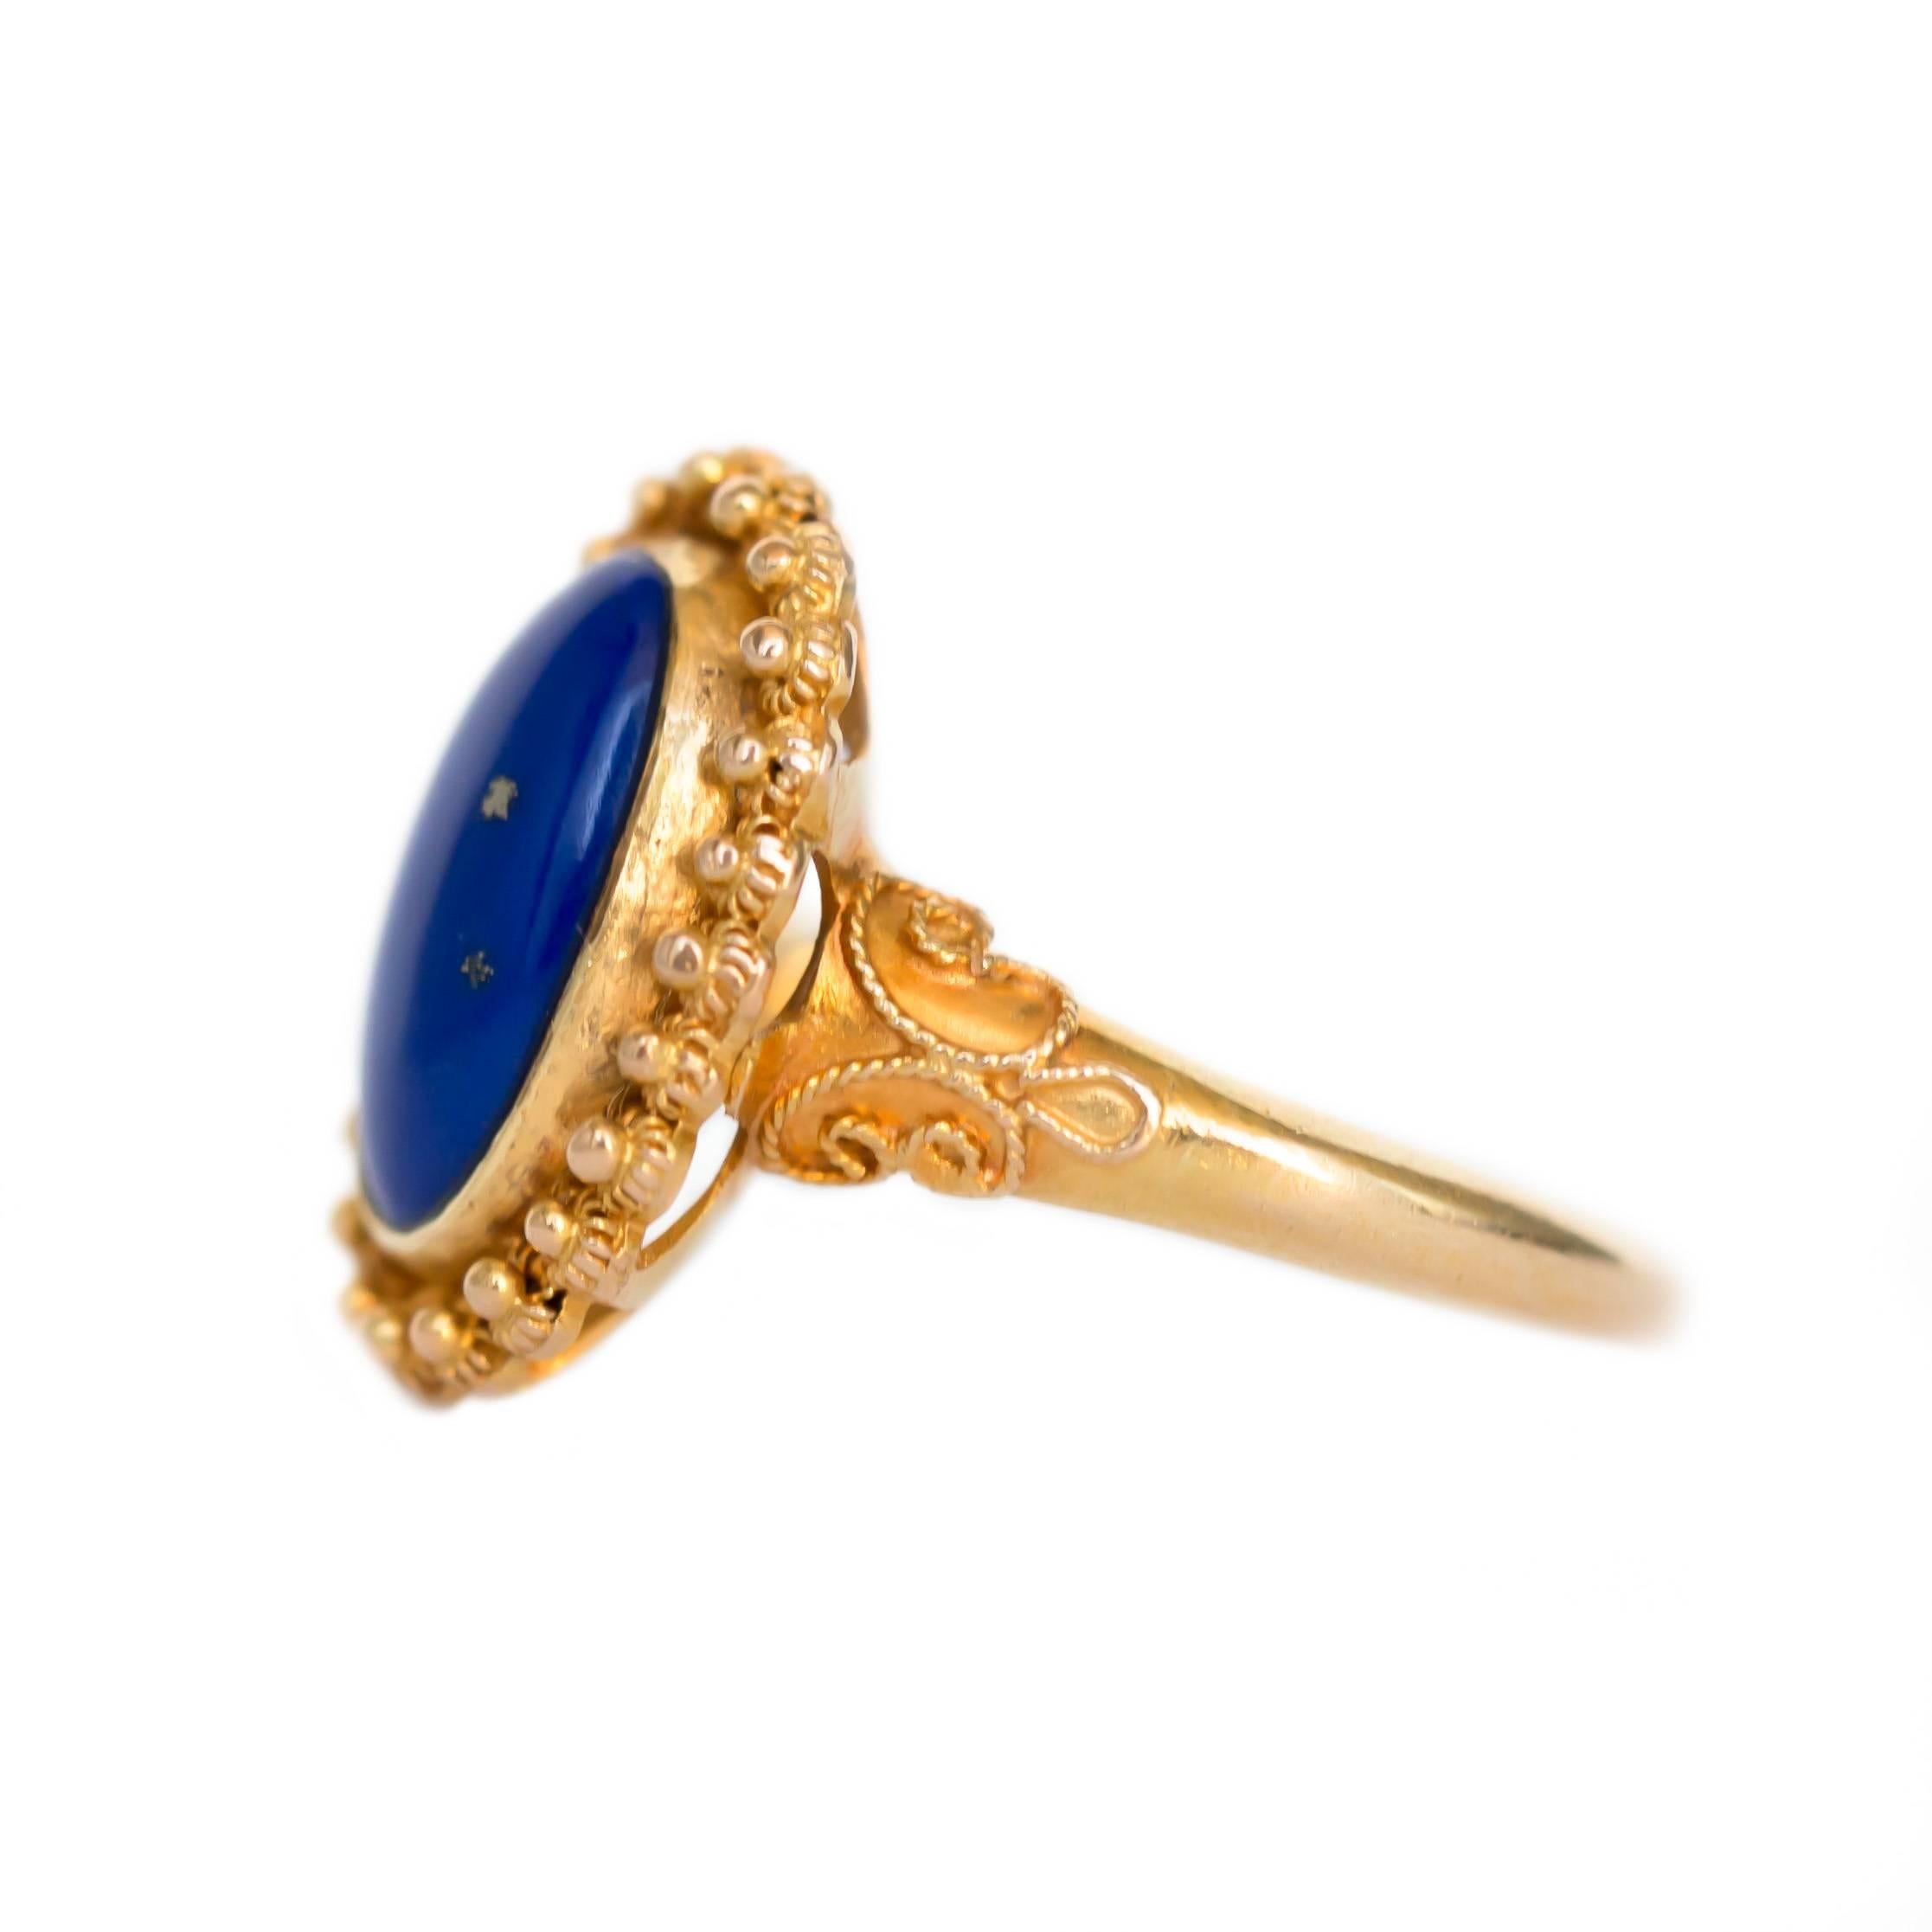 Item Details: 
Ring Size: 4.5
Metal Type: 18 Karat Yellow Gold
Weight: 3.9 grams

Color Stone Details: 
Type: Lapis Lazuli
Shape: Oval
Carat Weight: 2 carat
Color: Royal Blue

Finger to Top of Stone Measurement: 6.05mm